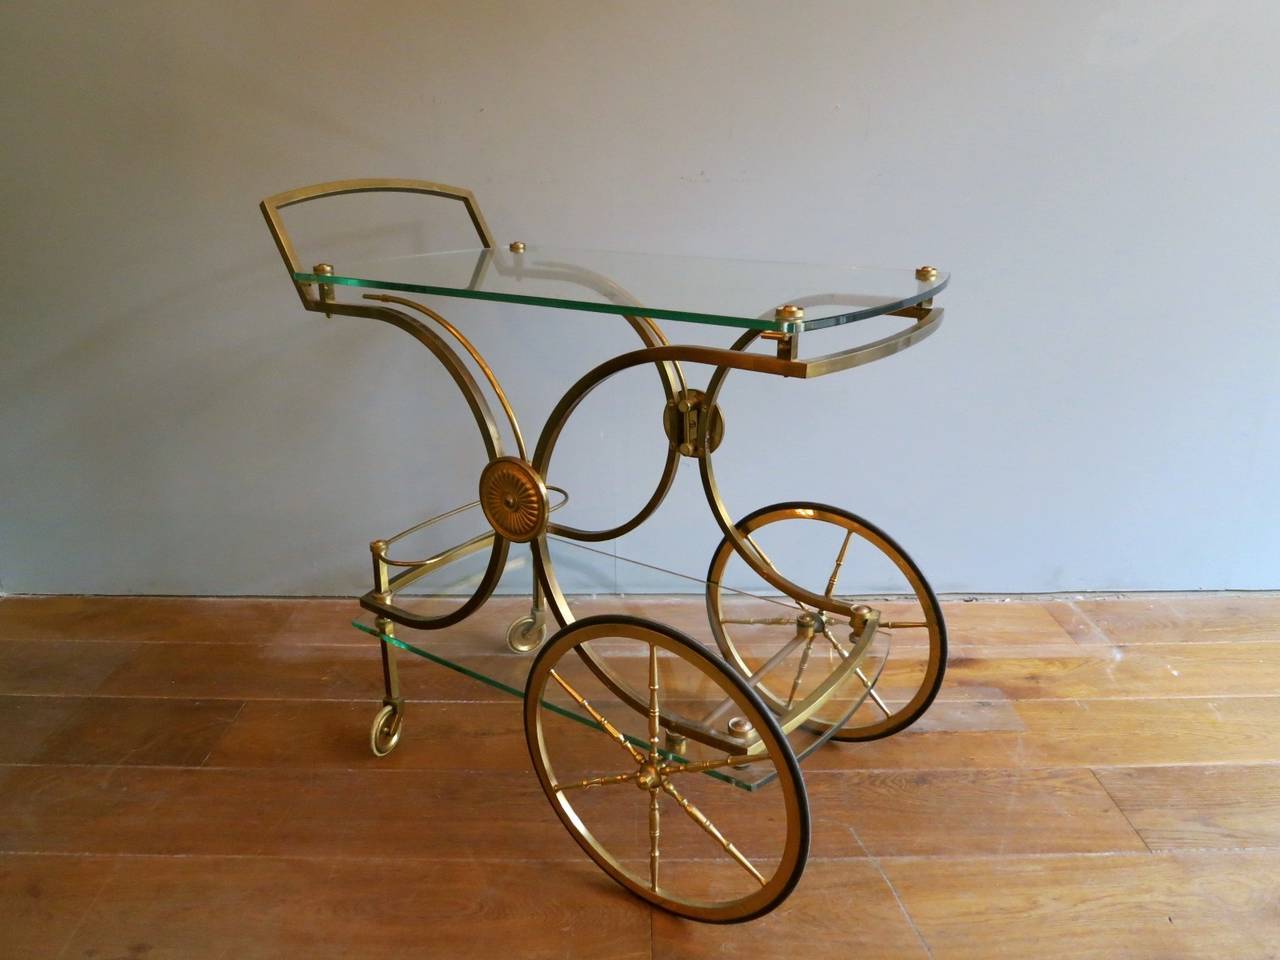 A very good quality brass and glass cart or trolley. A brass X-frame design decorated with brass rosettes supporting two glass tops. There are two supports which swing out for further use. An elegant and superior cart.